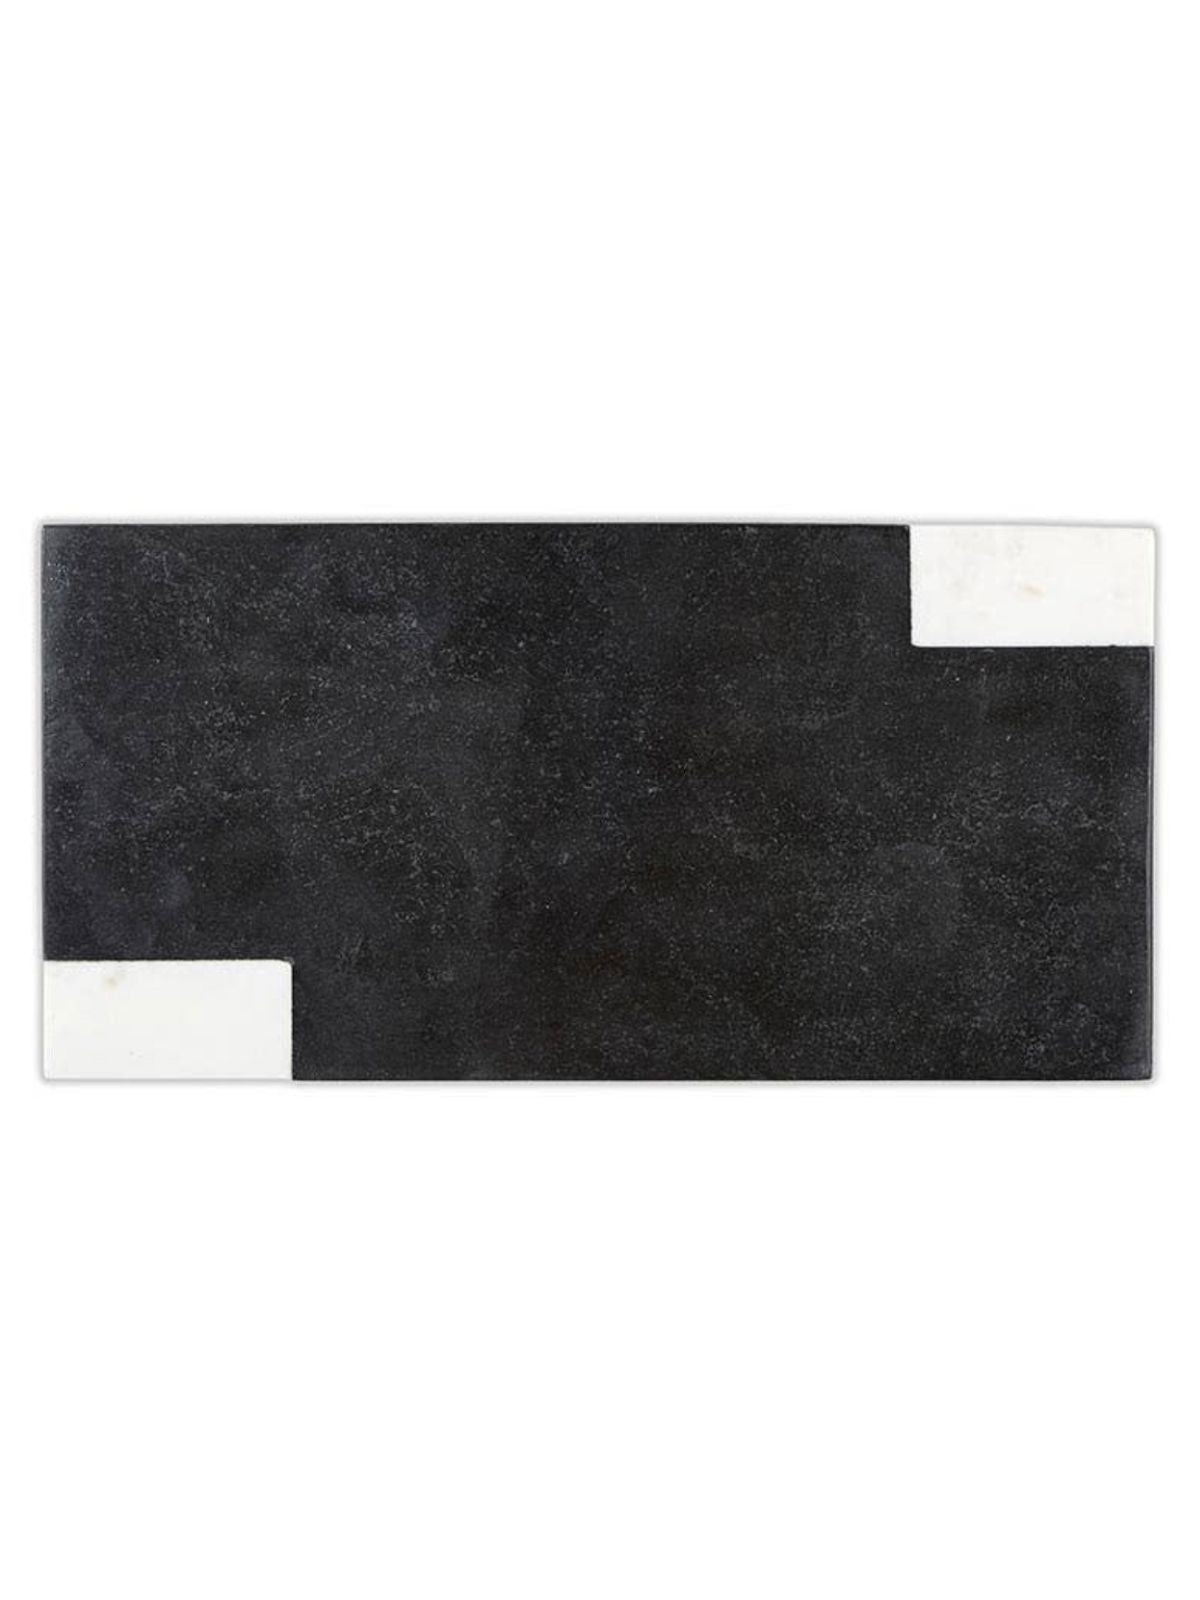 18 inch Luxury Black and White Marble Rectangular Serving Board, Top View. 